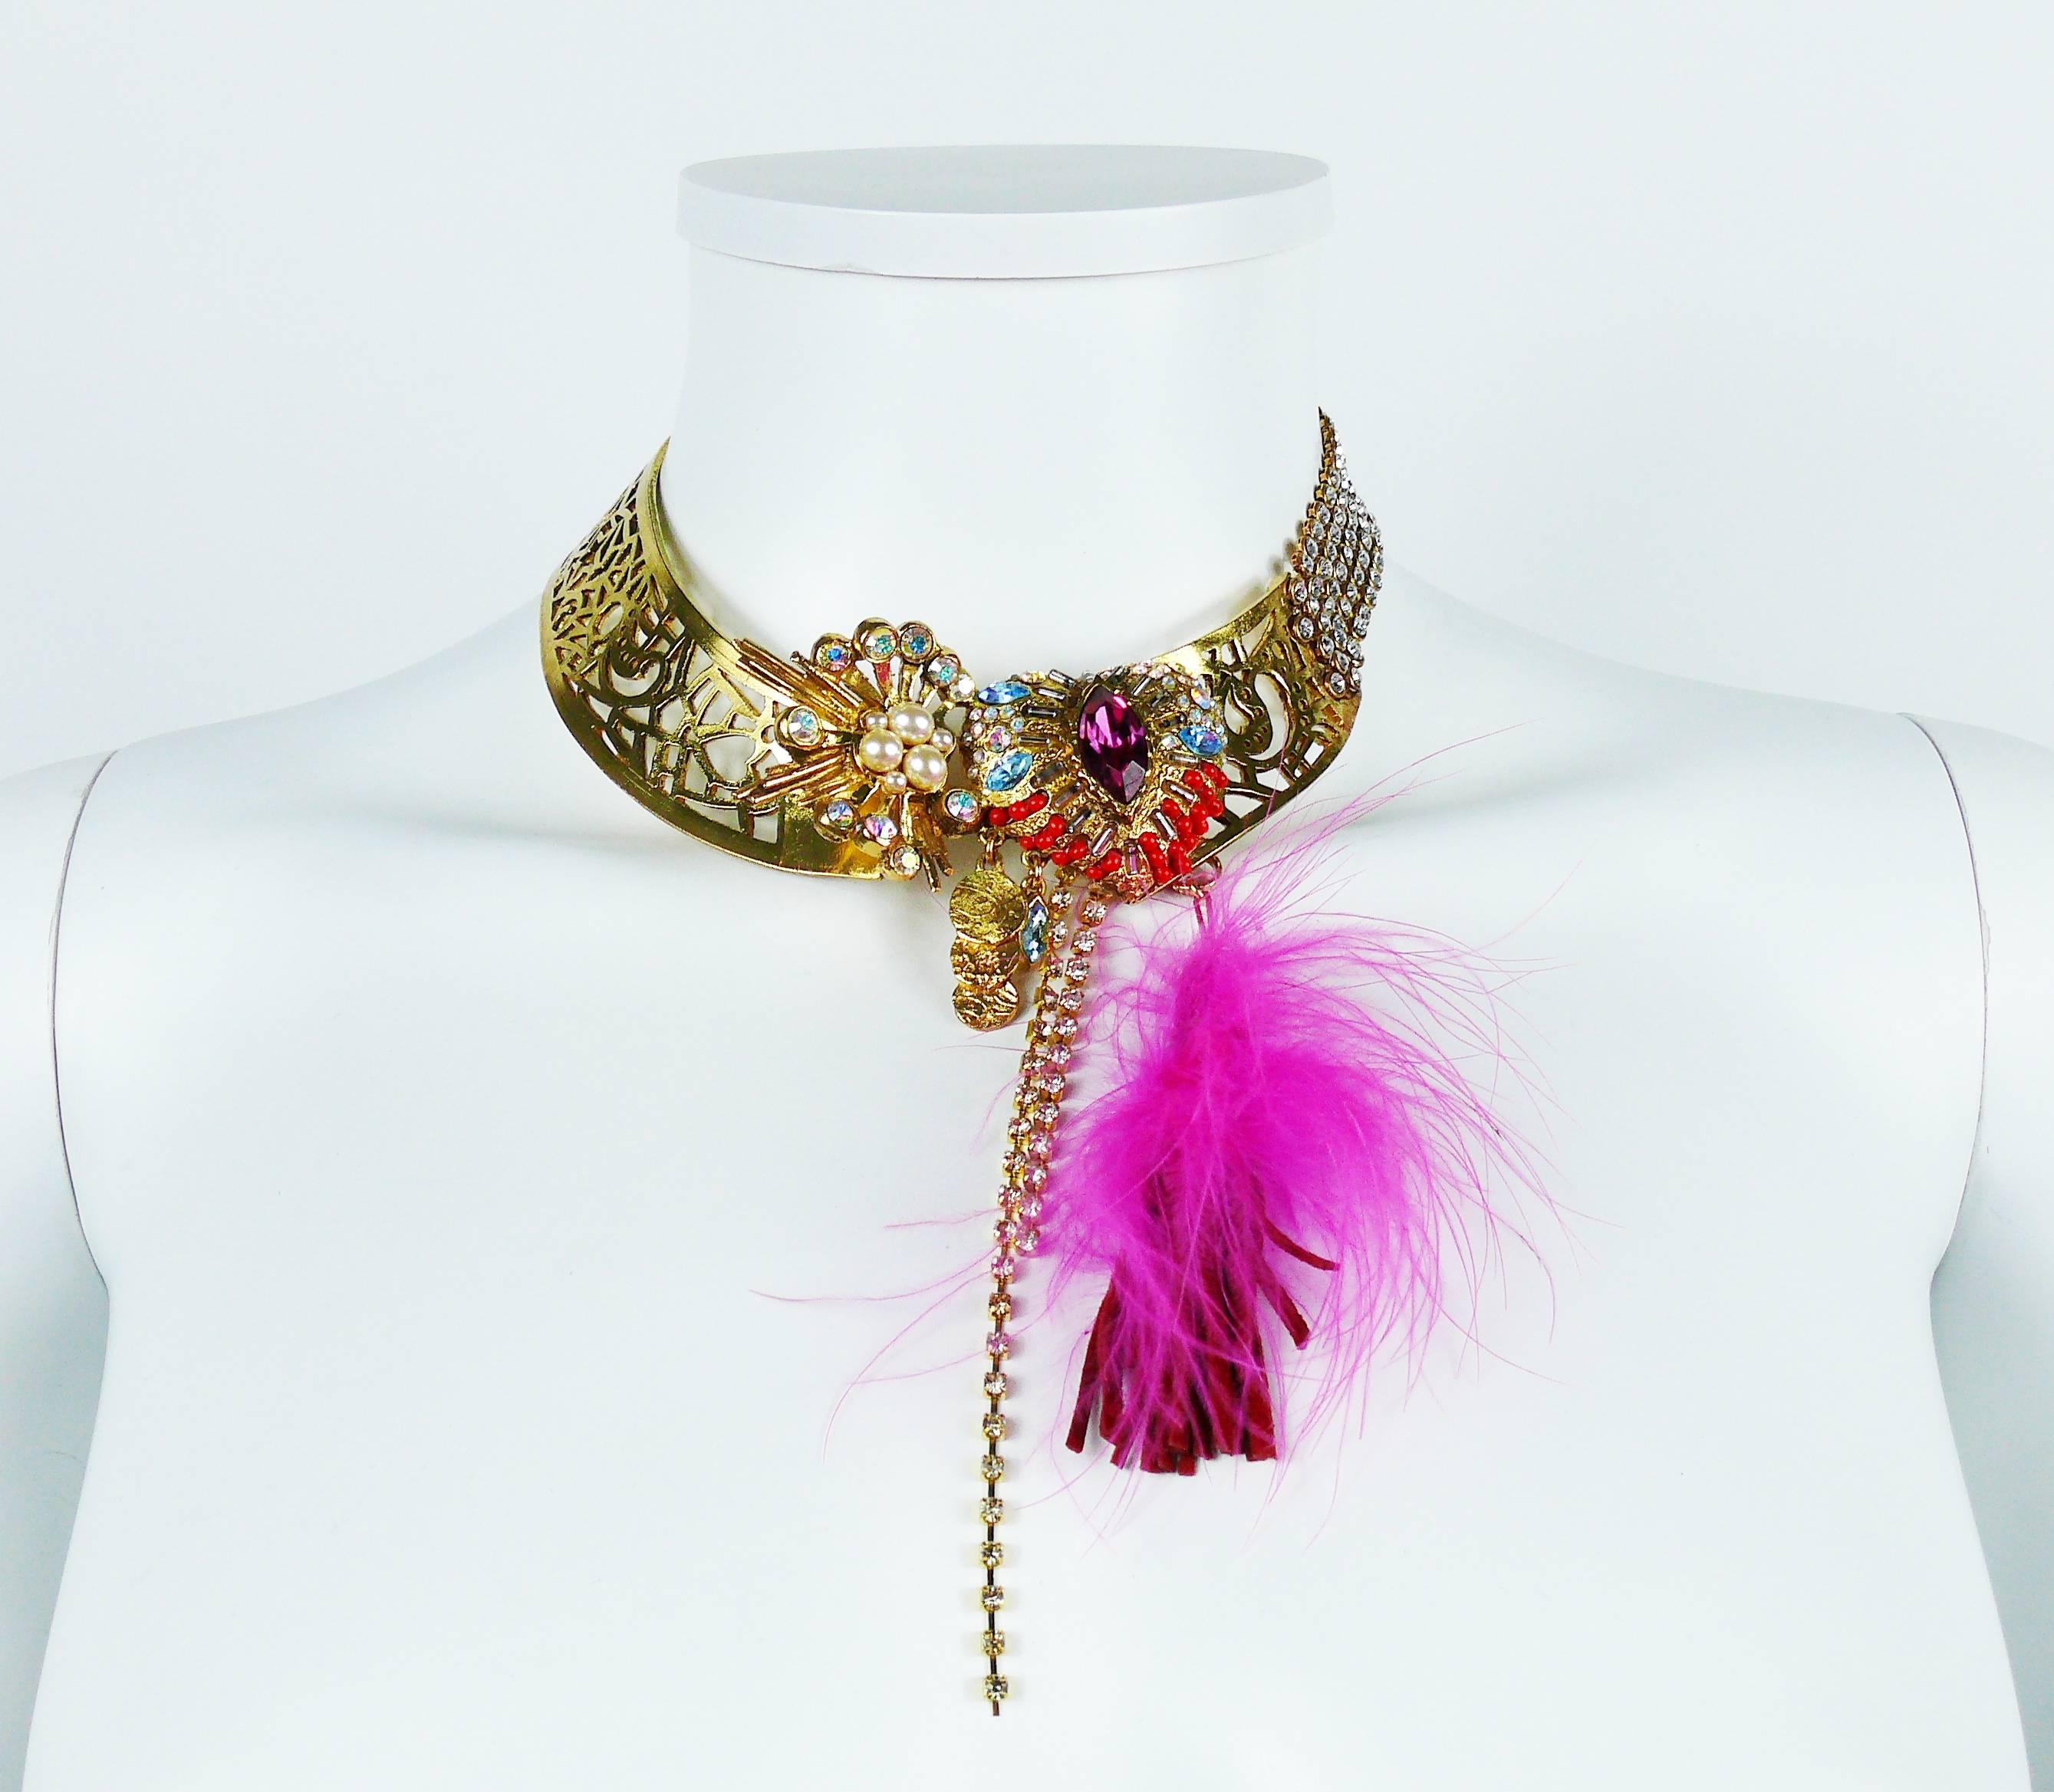 CHRISTIAN LACROIX vintage opulent jewelled gold tone choker necklace featuring multicolored SWAROVSKI crystals, faux pearls, faux coral beads and a suede tassel charm with feathers.

Marked CHRISTIAN LACROIX CL Made in France.

JEWELRY CONDITION